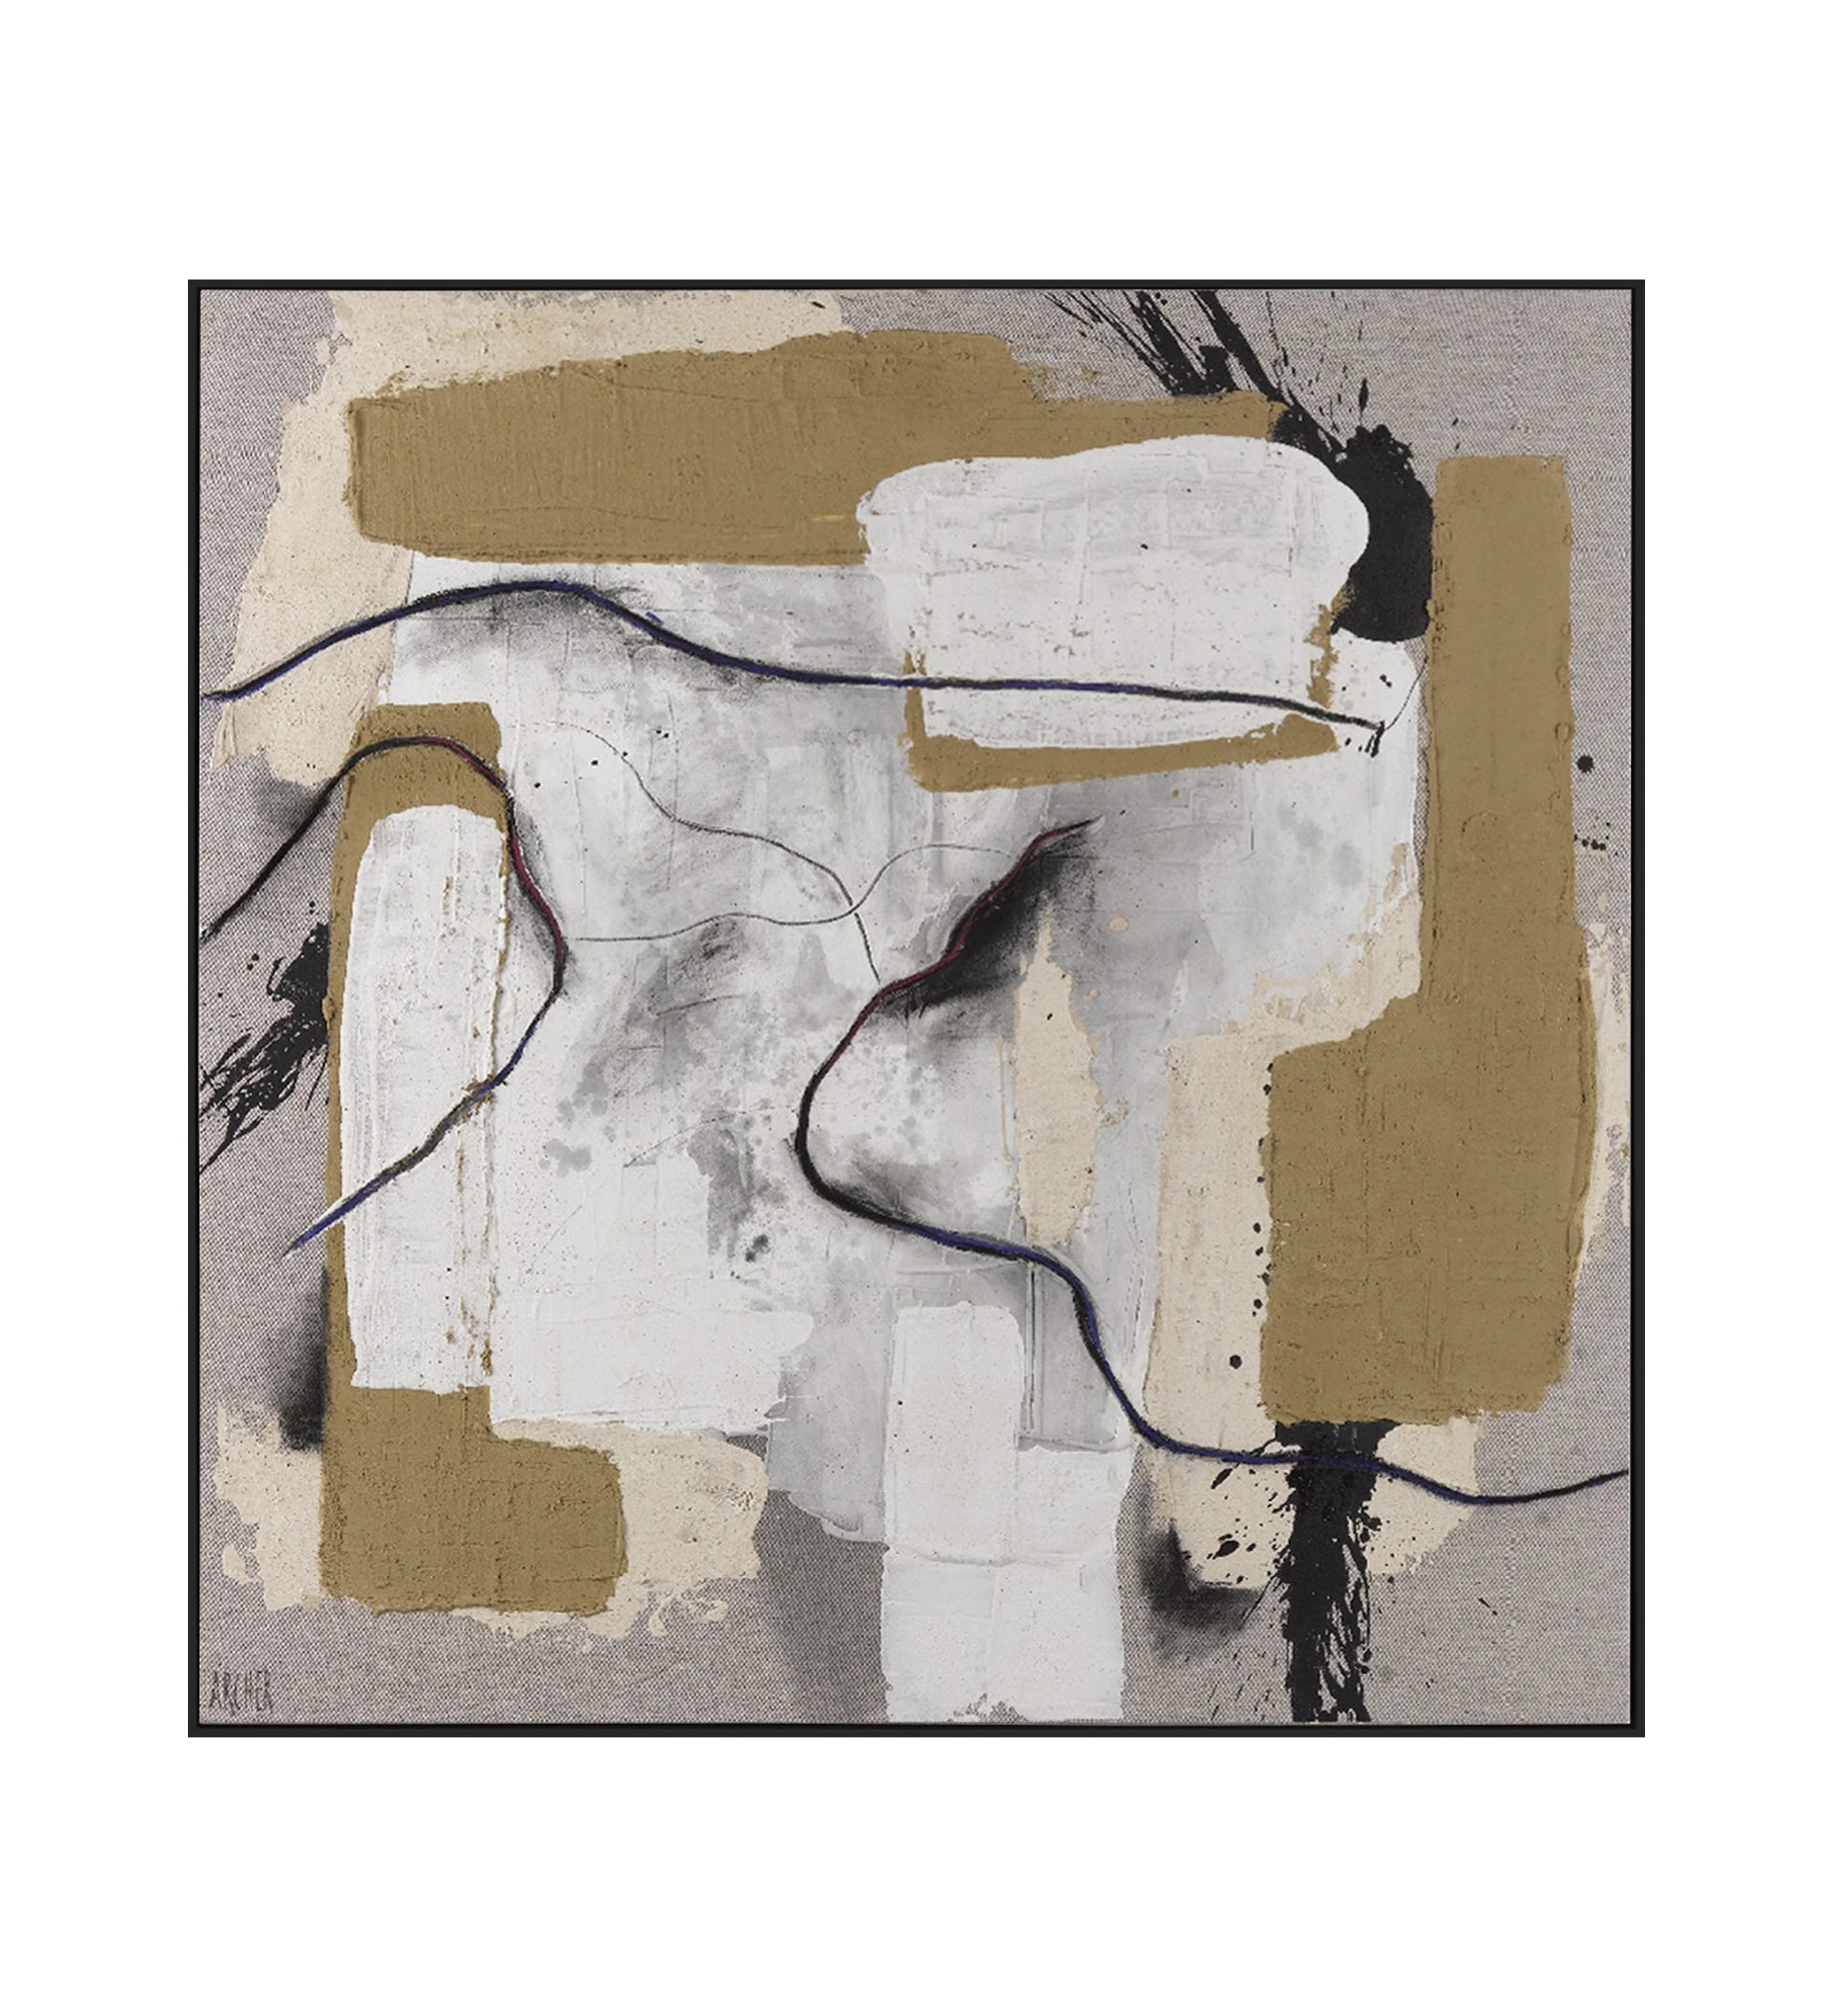 Abstract painting in camel tones, wooden frame, 120 x 120 cm.